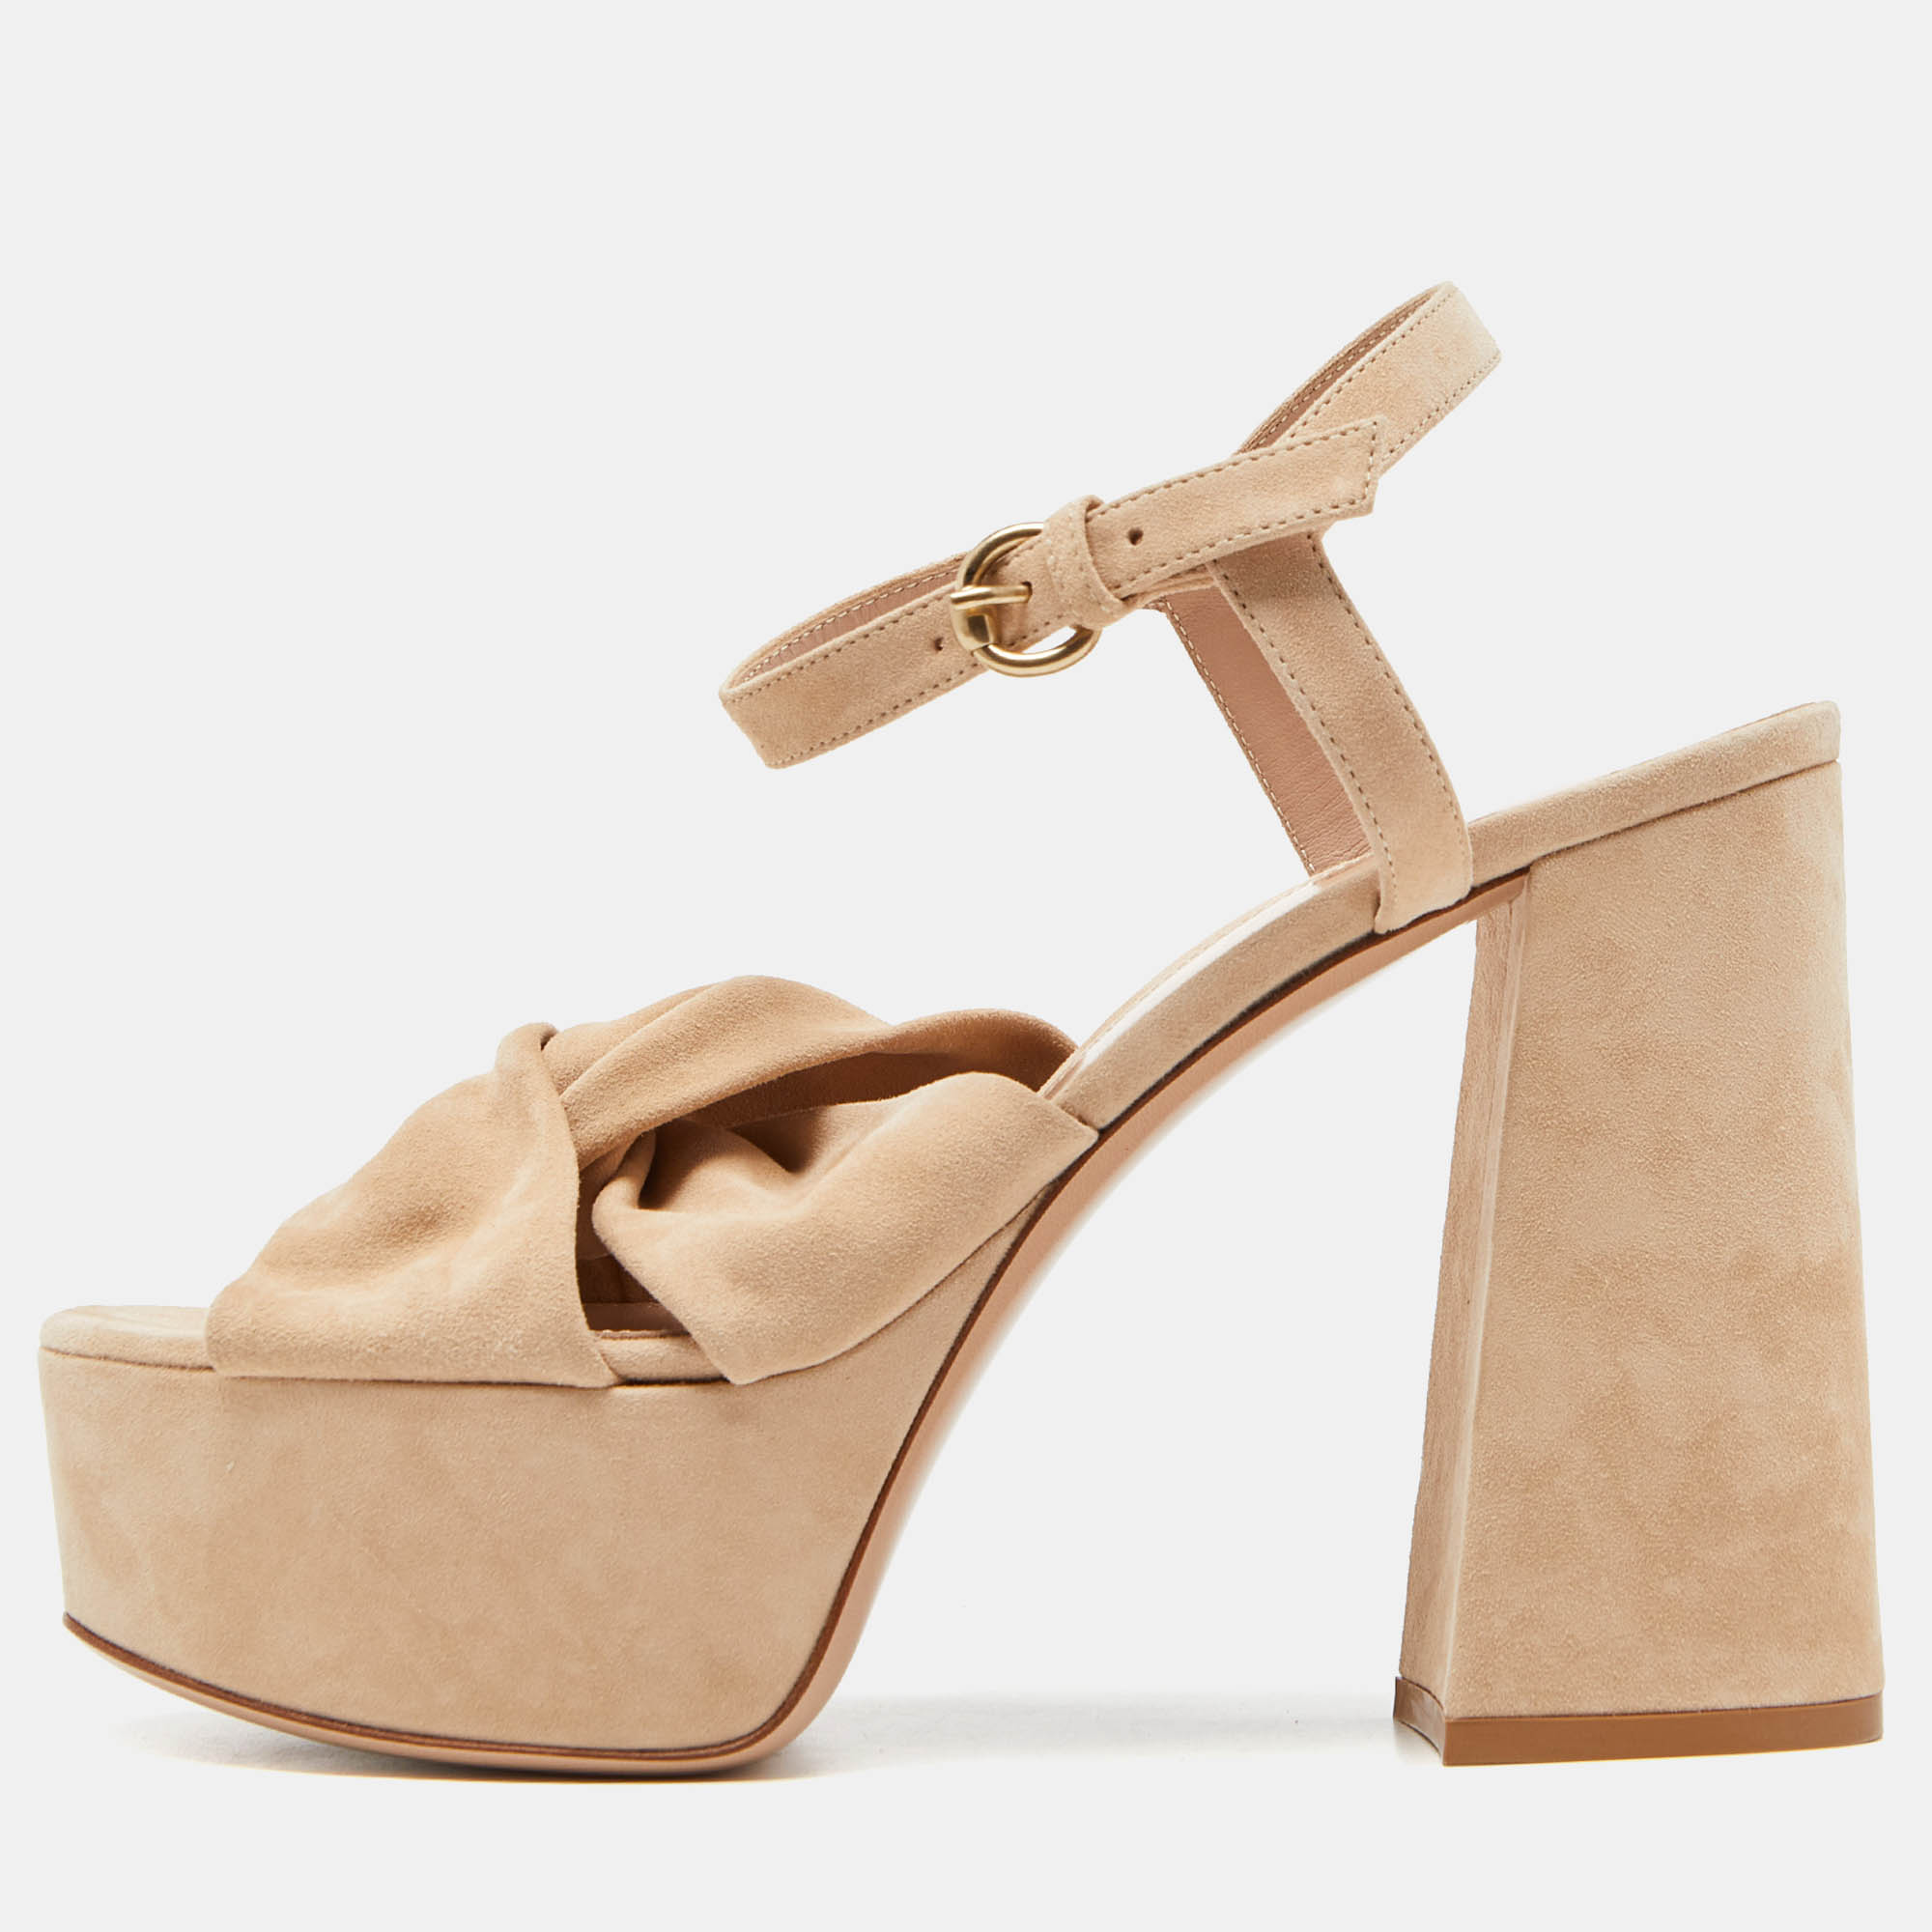 Pre-owned Gianvito Rossi Beige Suede Block Heel Ankle Strap Sandals Size 38